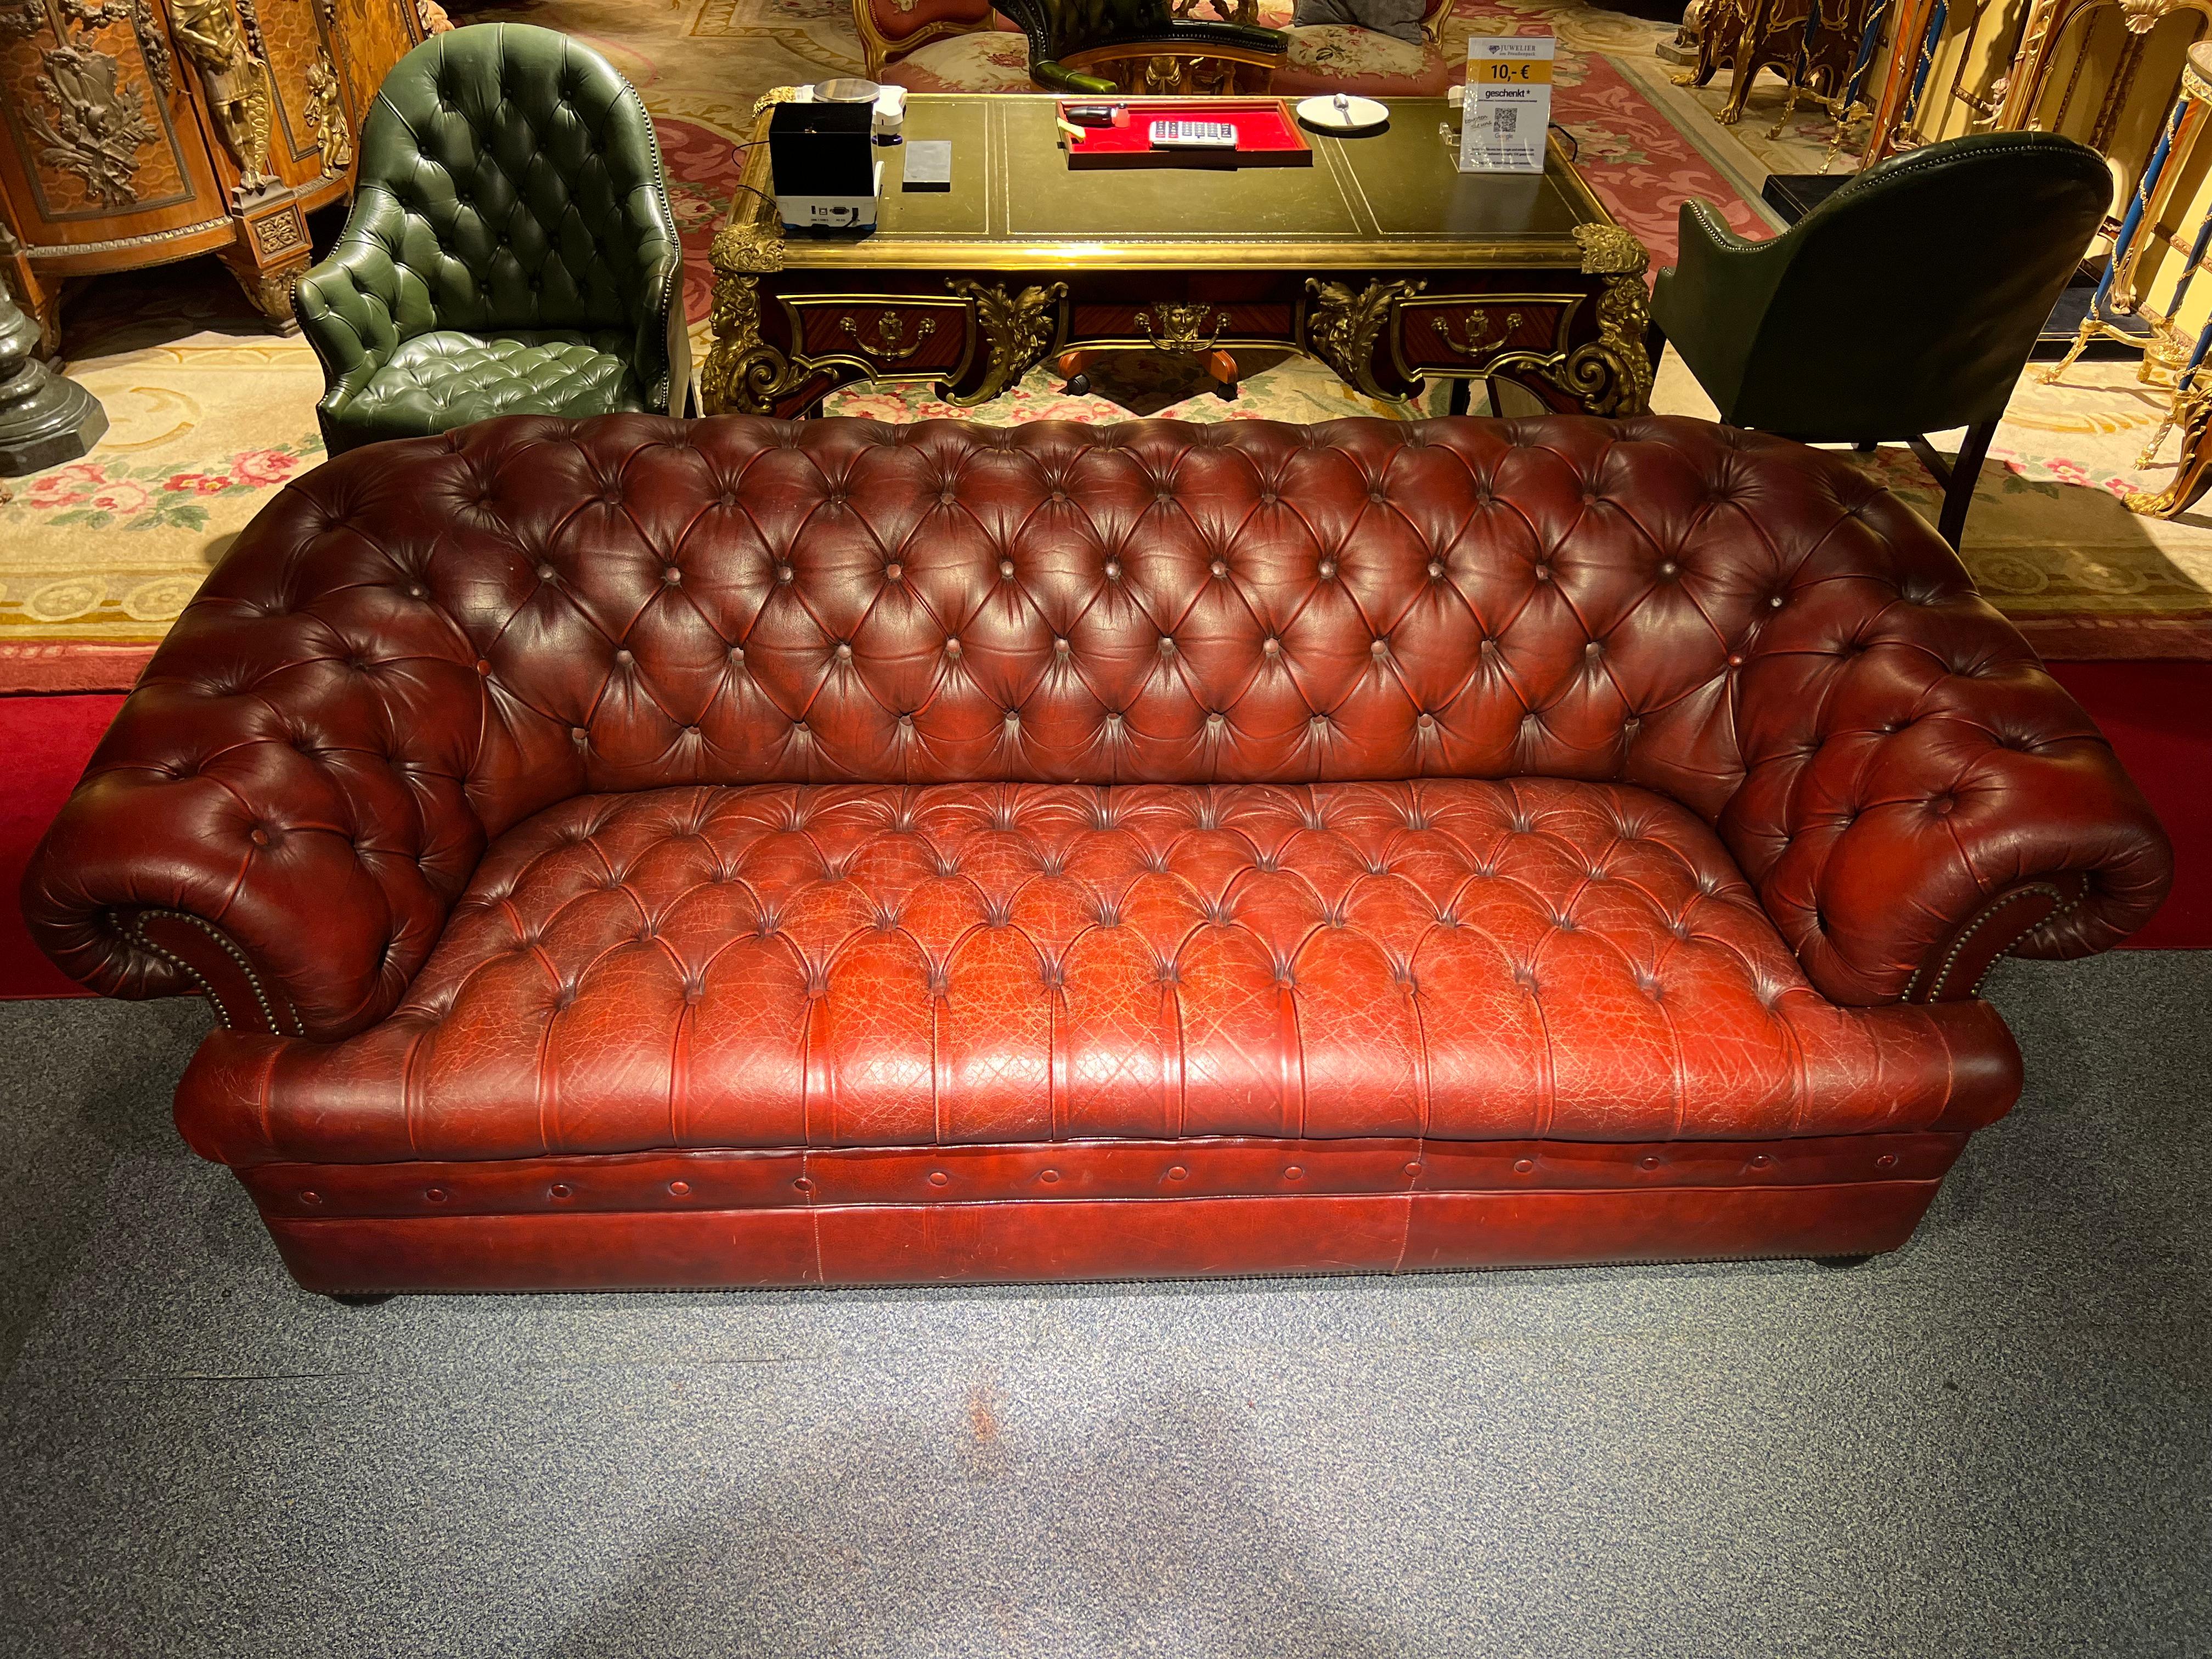 3-seat chesterfield sofa with button tufted detail, circa 1970. Exceptional quality. Double hand-stitching, and applied brass nailhead trim details. The ebonized composite orb feet have been left original, showing wear from age / use. The leather is